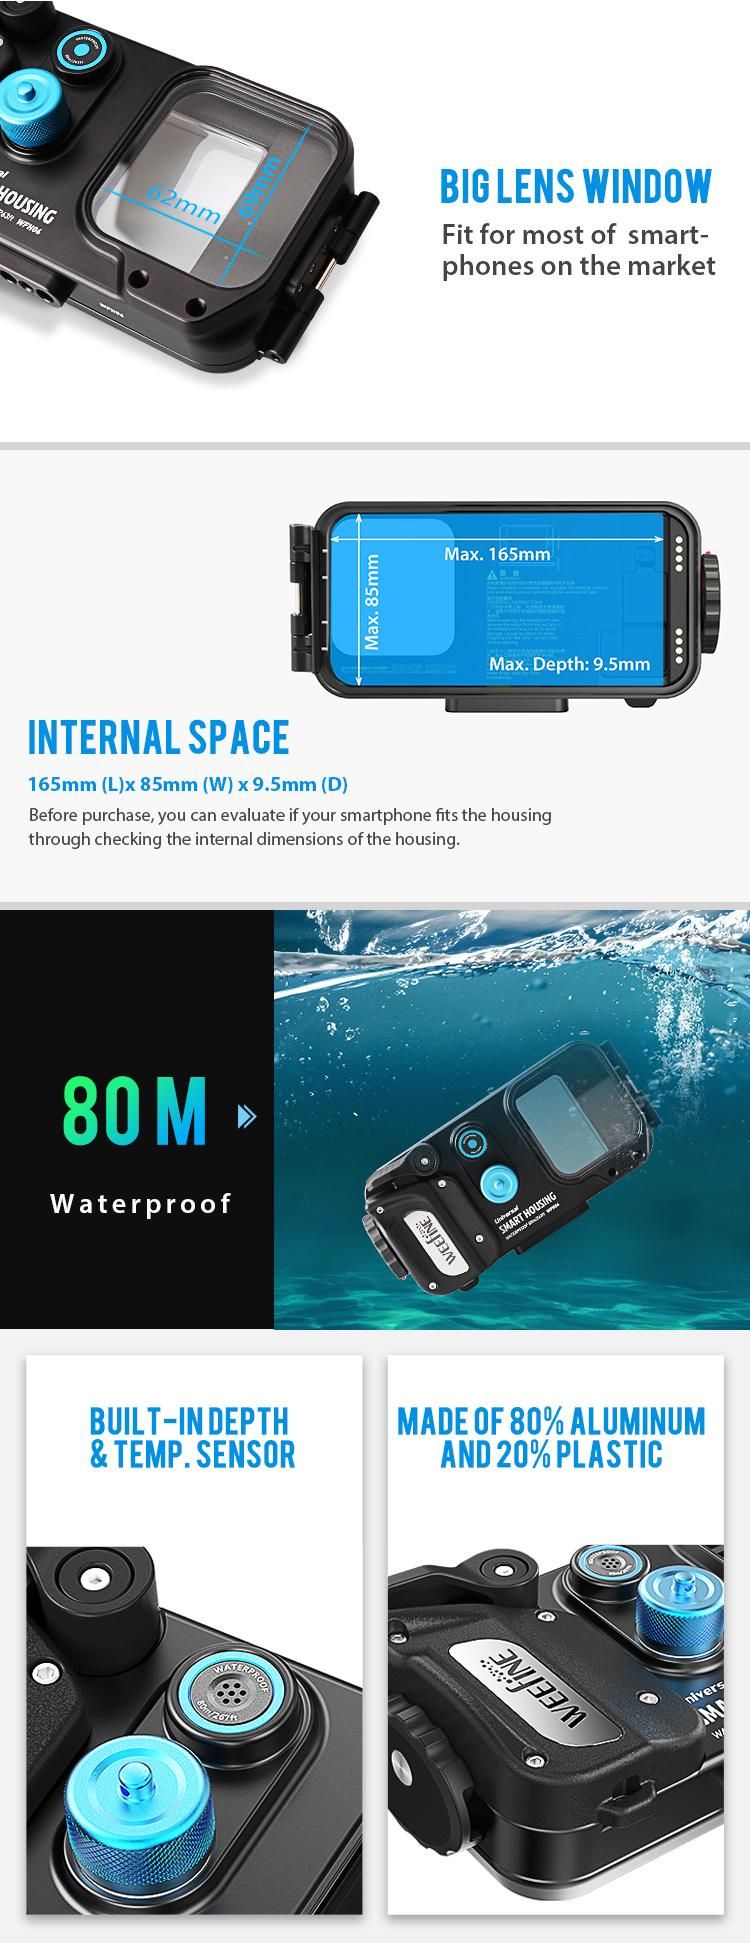 Built-in Automatic Vacuum System Waterproof Camera Housing for Any Ios or Android Operating System